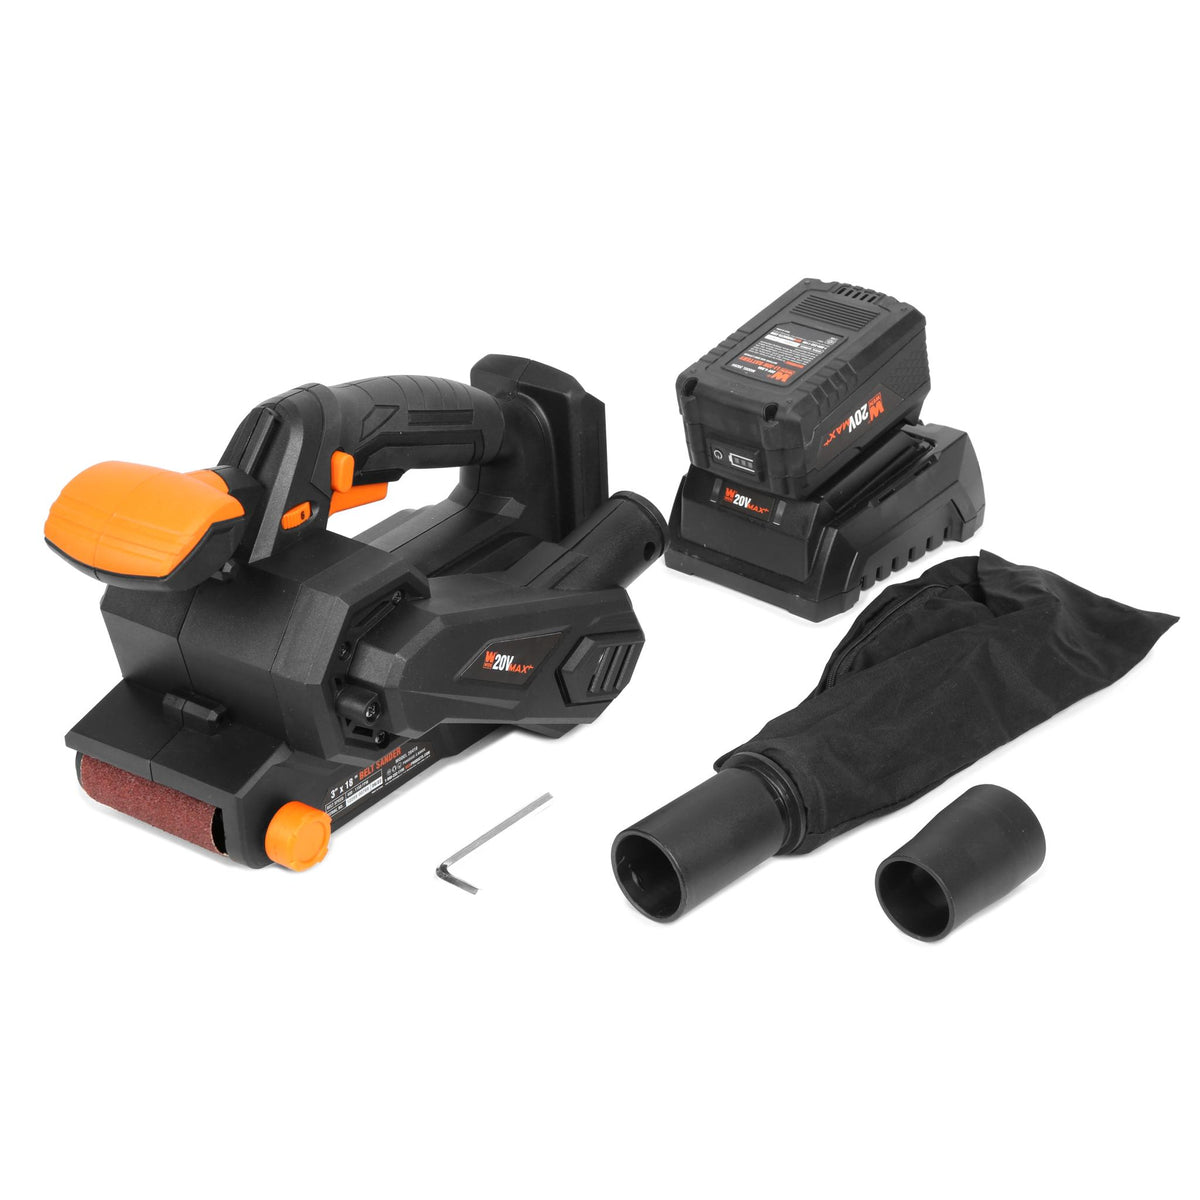 https://www.wenproductsus.shop/wp-content/uploads/1692/52/wen-20418-20v-max-cordless-belt-sander-variable-speed-handheld-and-portable-with-4-0ah-battery-and-charger-wen-visit-our-online-store-we-have-what-youre-looking-for_1.jpg